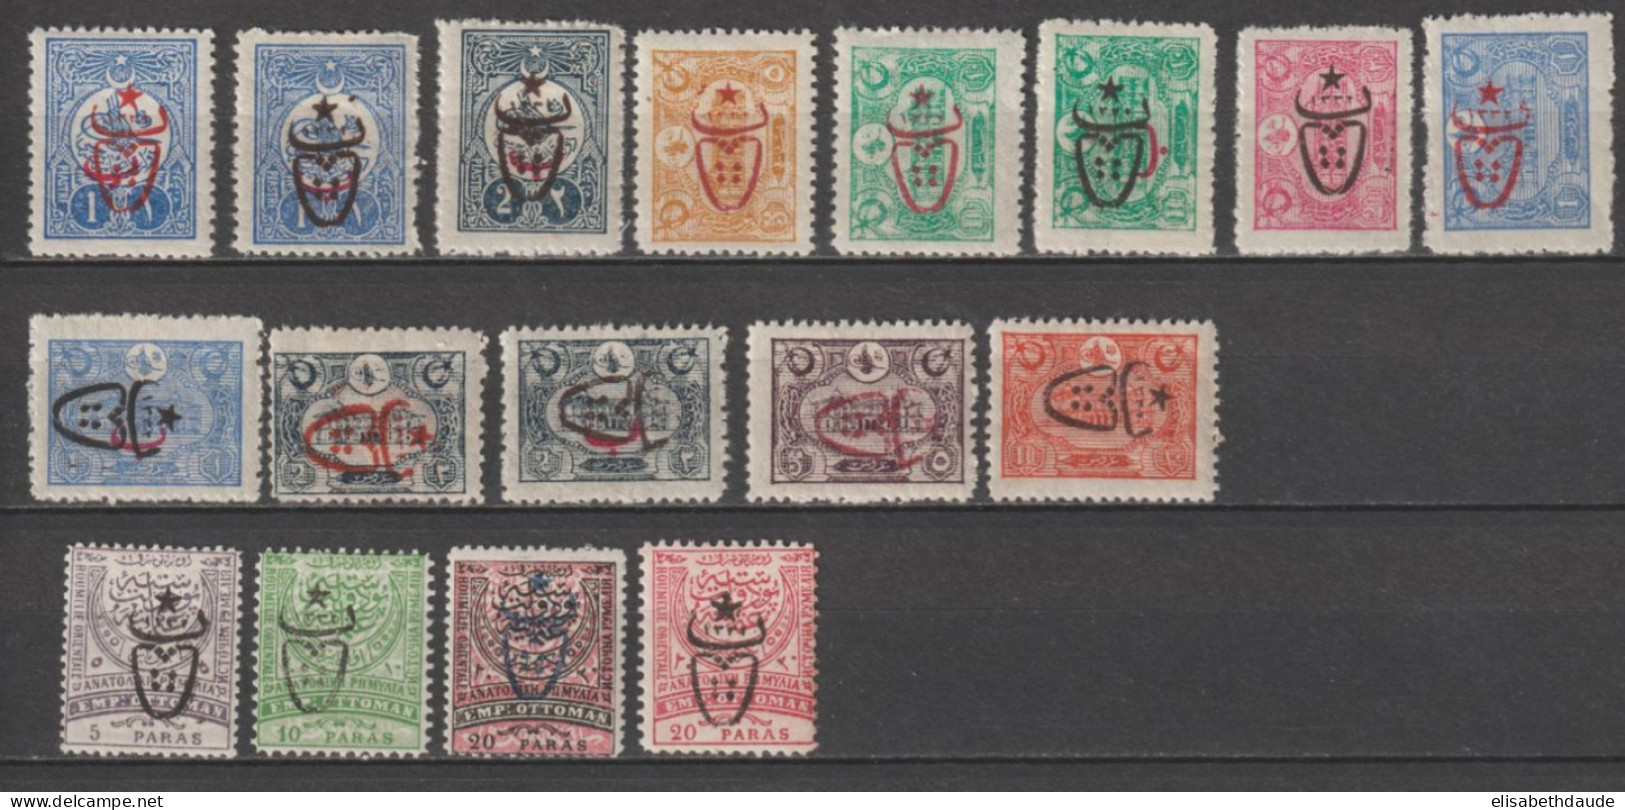 1917 - TURQUIE - SURCHARGE "KÄFER" SUPERBE COLLECTION A ETUDIER * MH 2 PAGES (YVERT 433/568) - COTE ENV.2500 EUR. !! - Unused Stamps